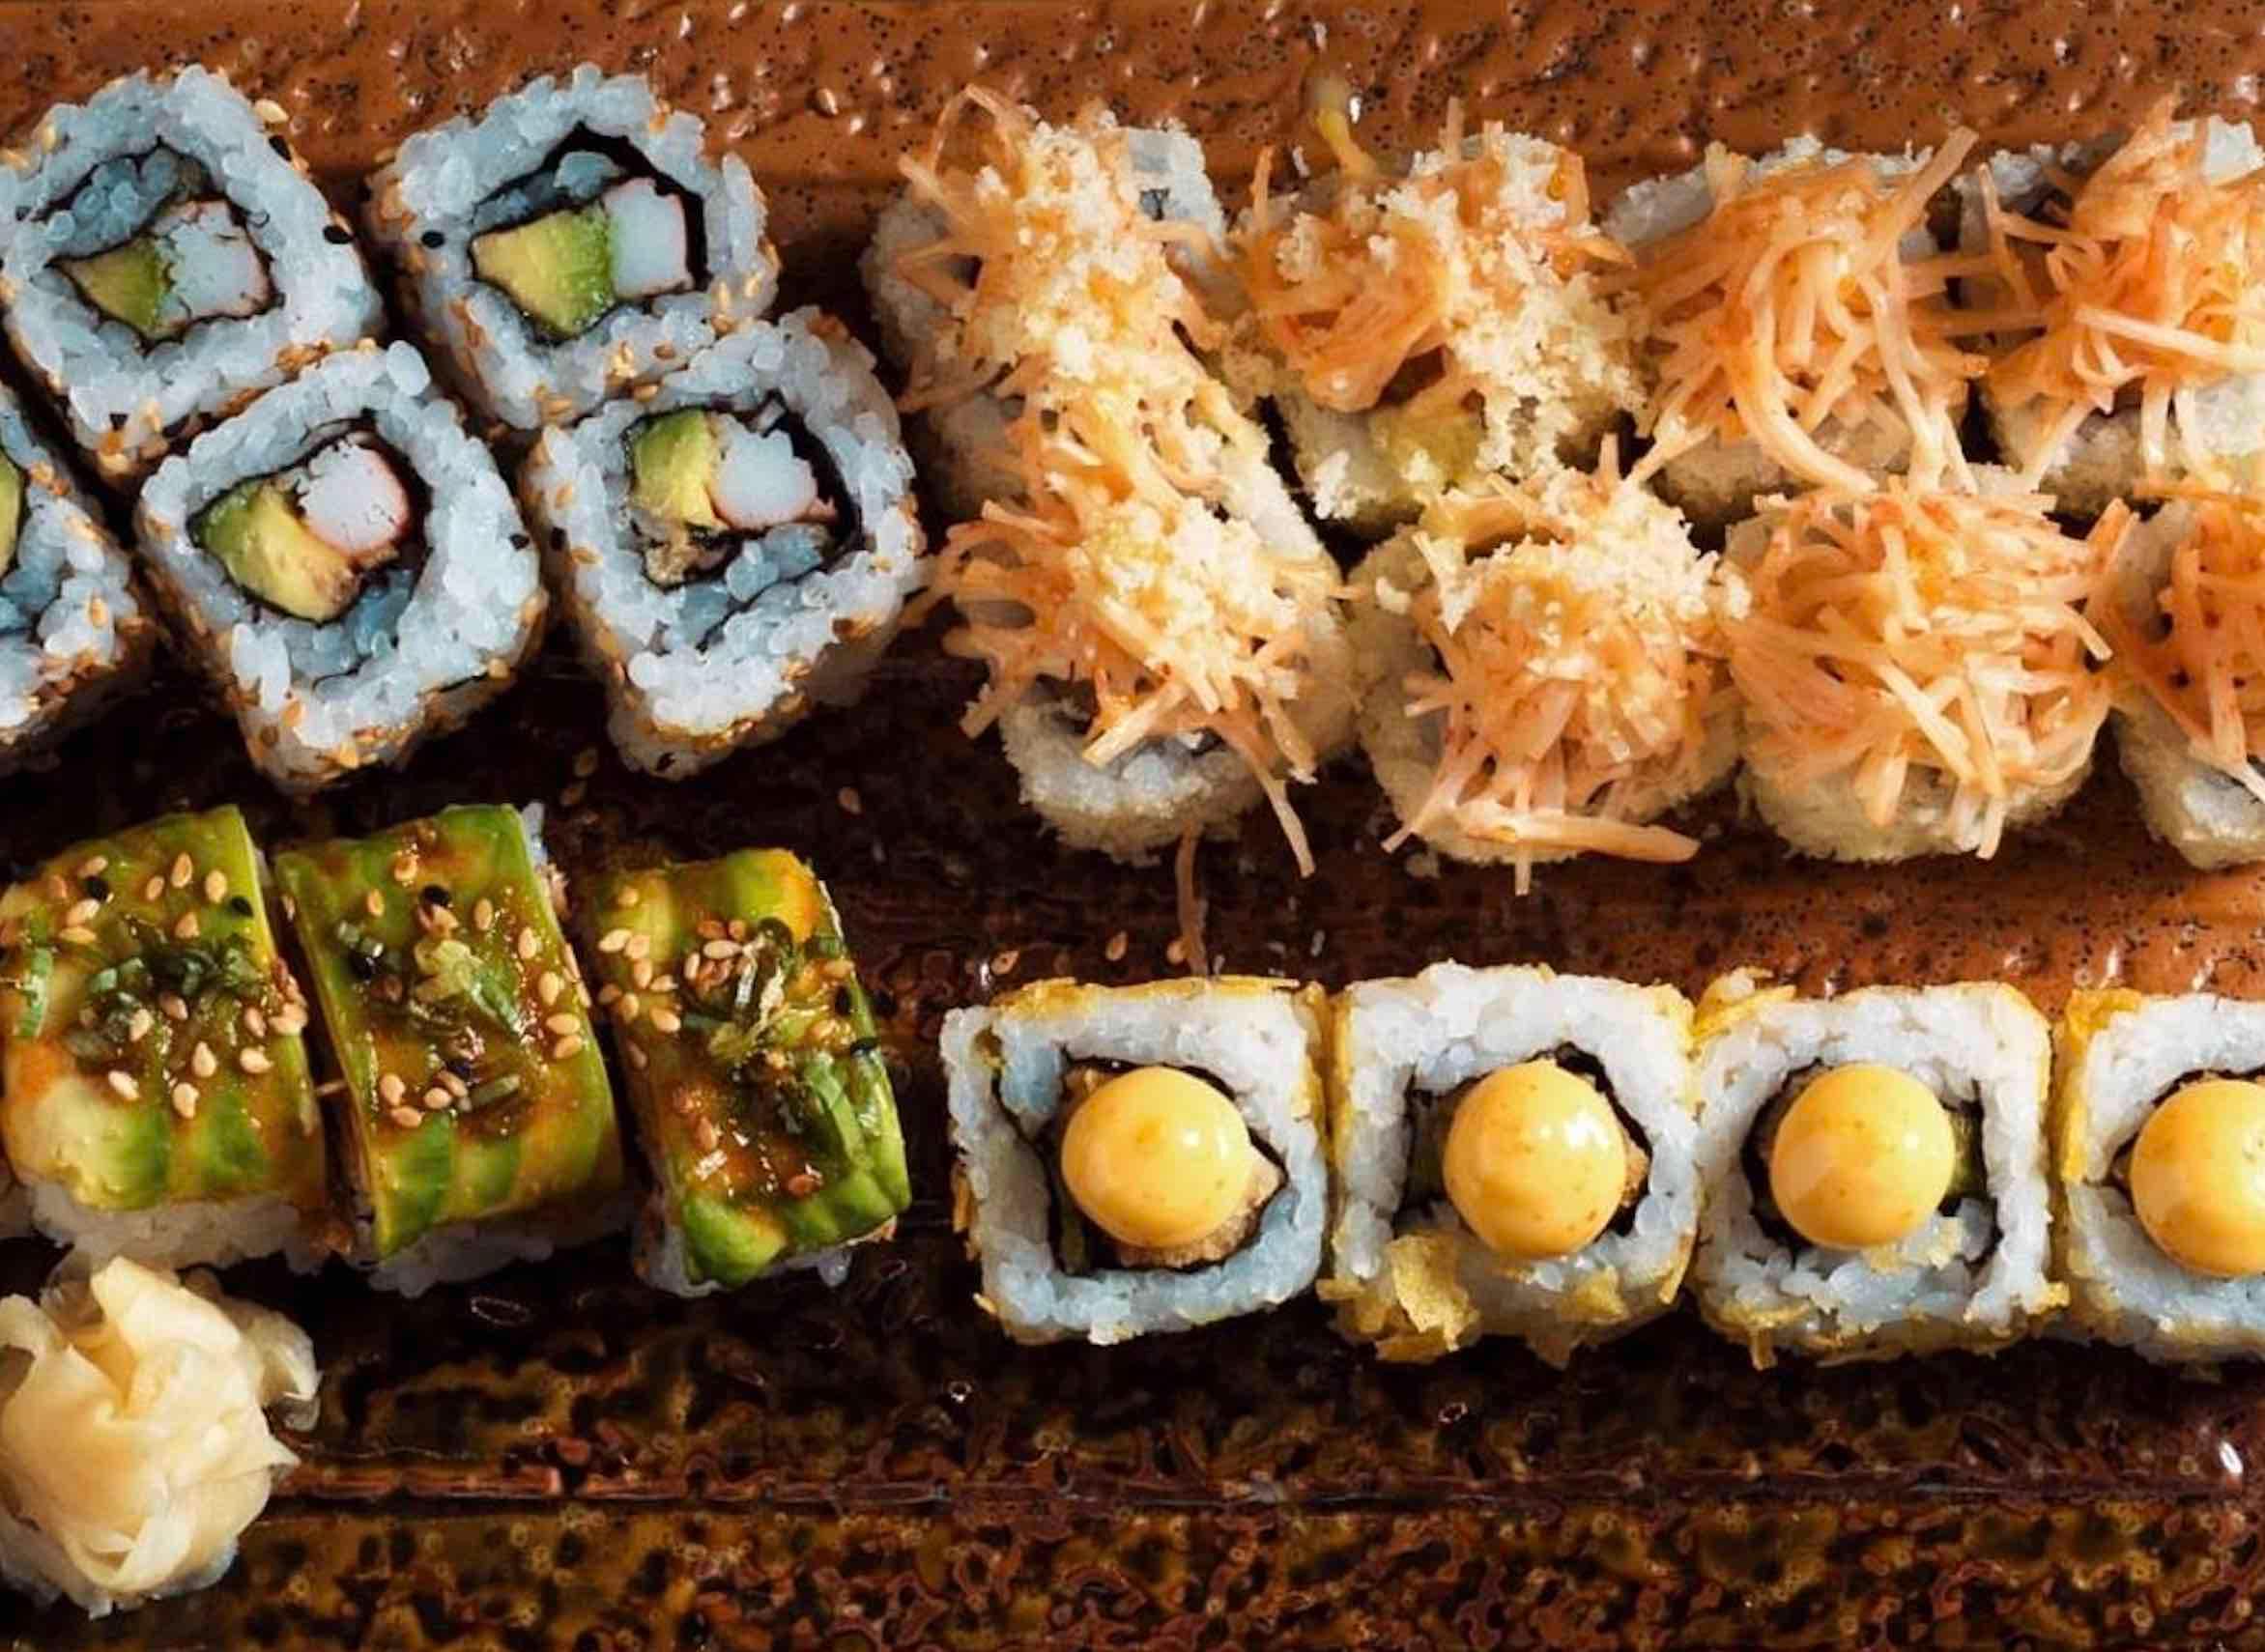 Tokyo has made a sushi-licious entry in Jeddah